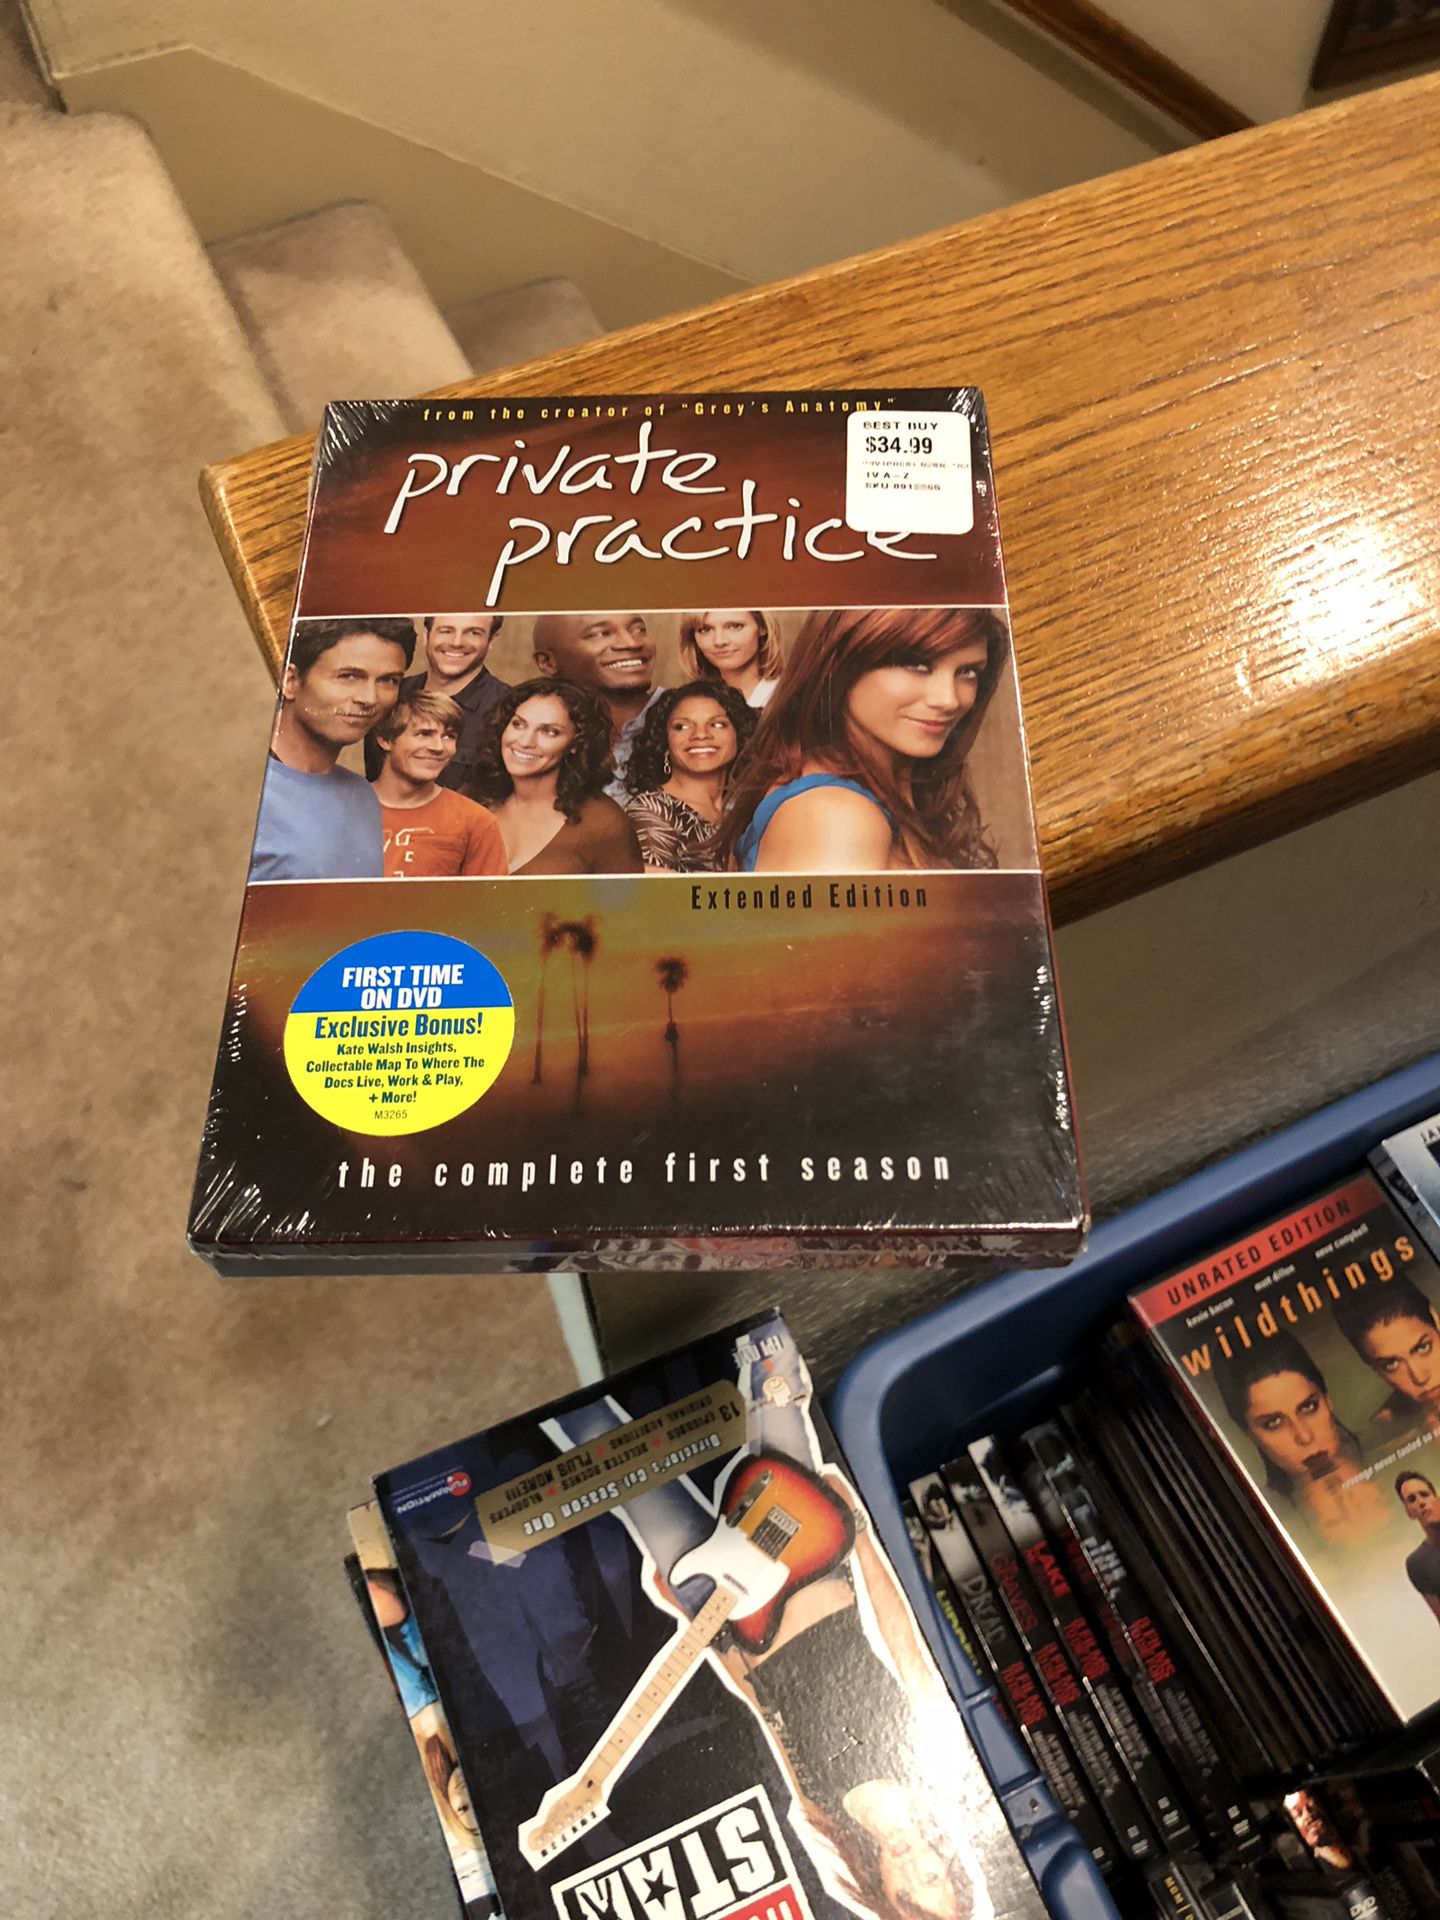 Private Practice The Complete First Season DVD Brand New Factory Sealed tv series one 1 s1 box set